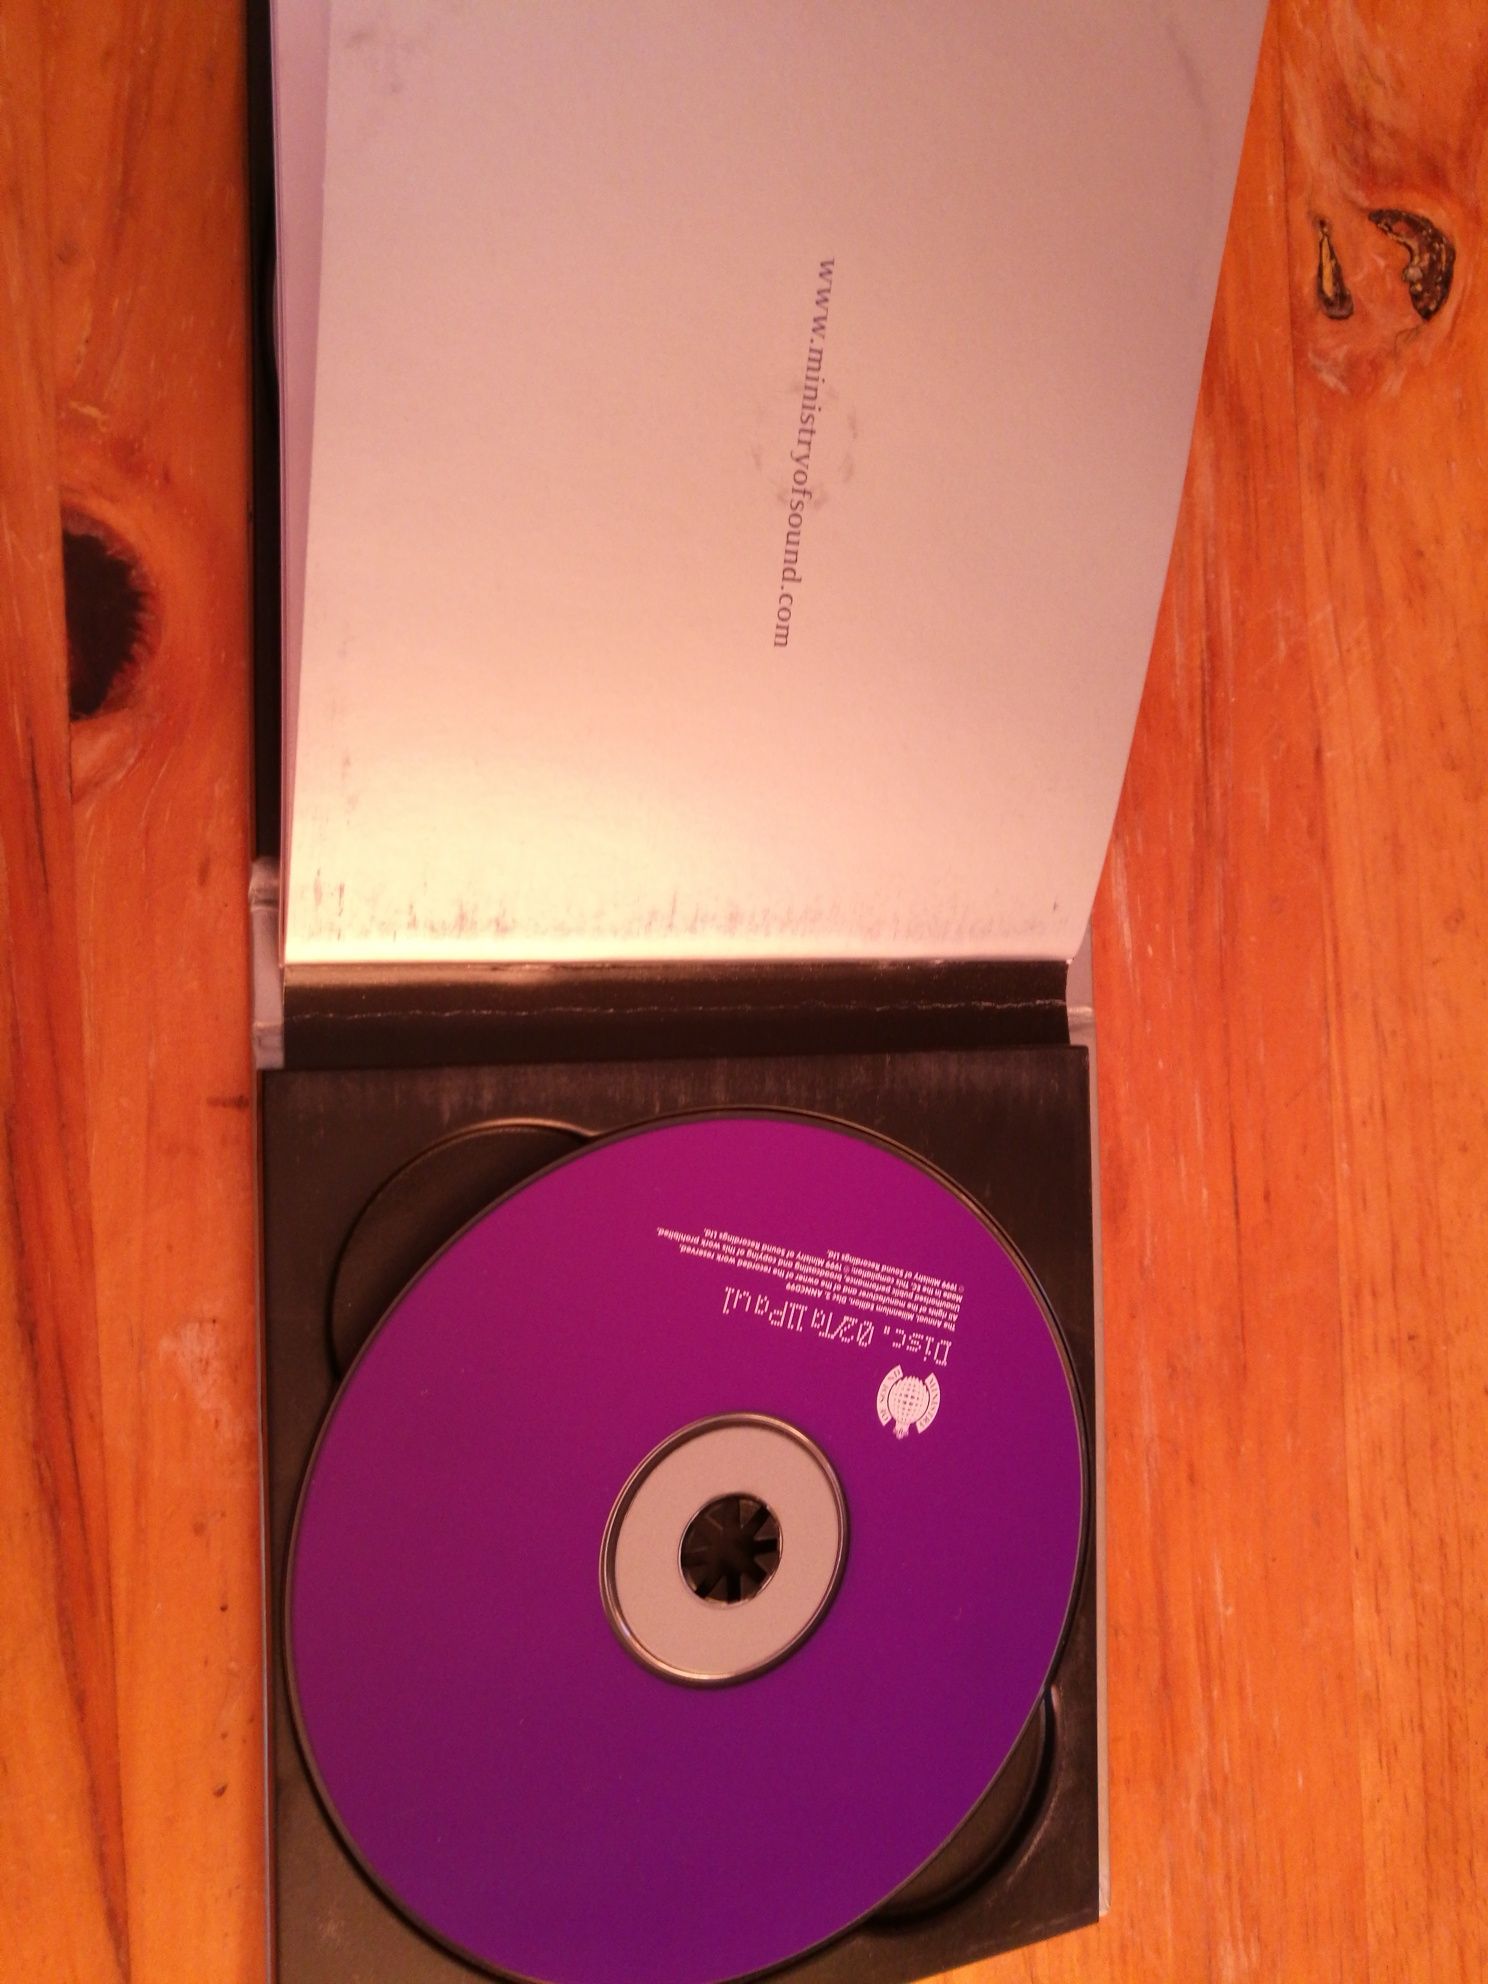 Ministry of sound the annual. 1999. 2cd. Millenium edition. Judge Jule